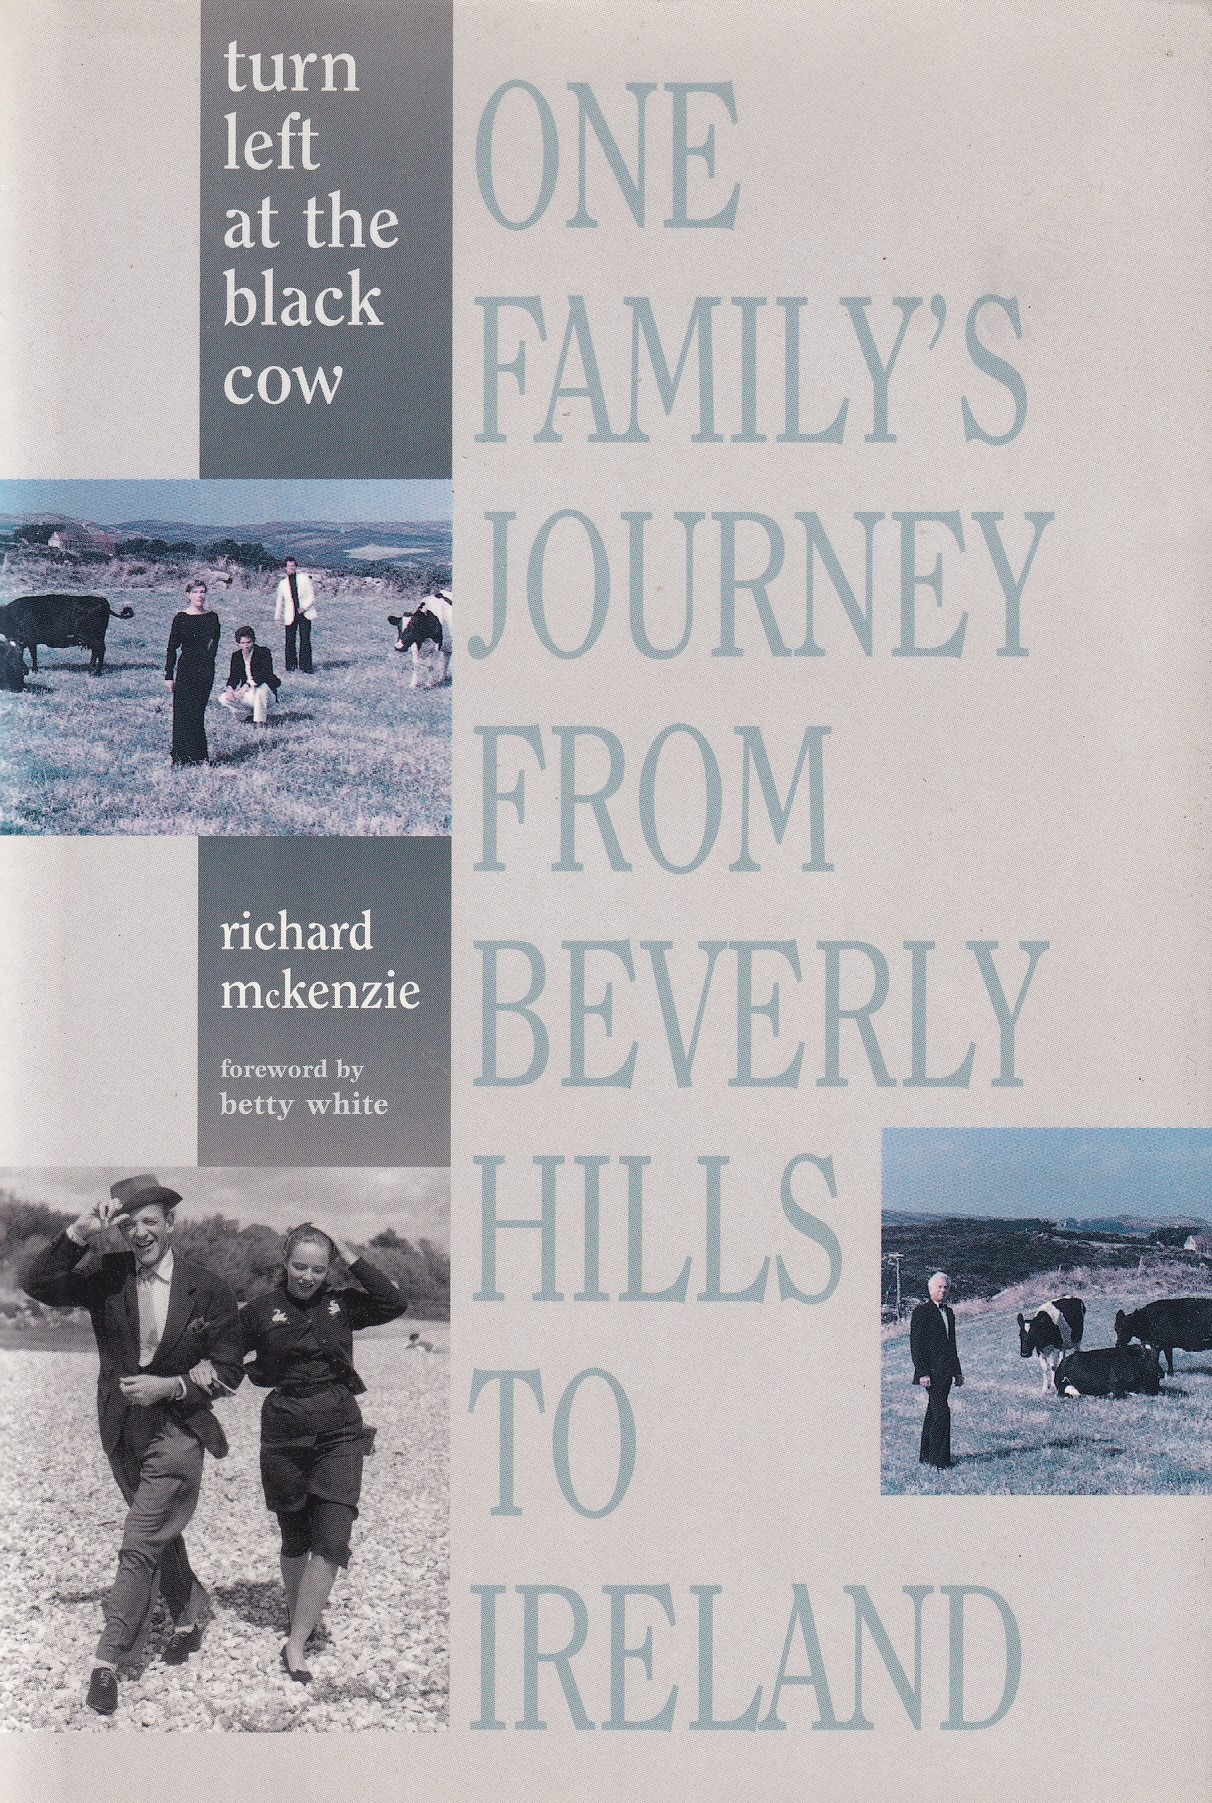 Turn Left at the Black Cow : One Family’s Journey from Beverly Hills to Ireland | McKenzie, Richard | Charlie Byrne's